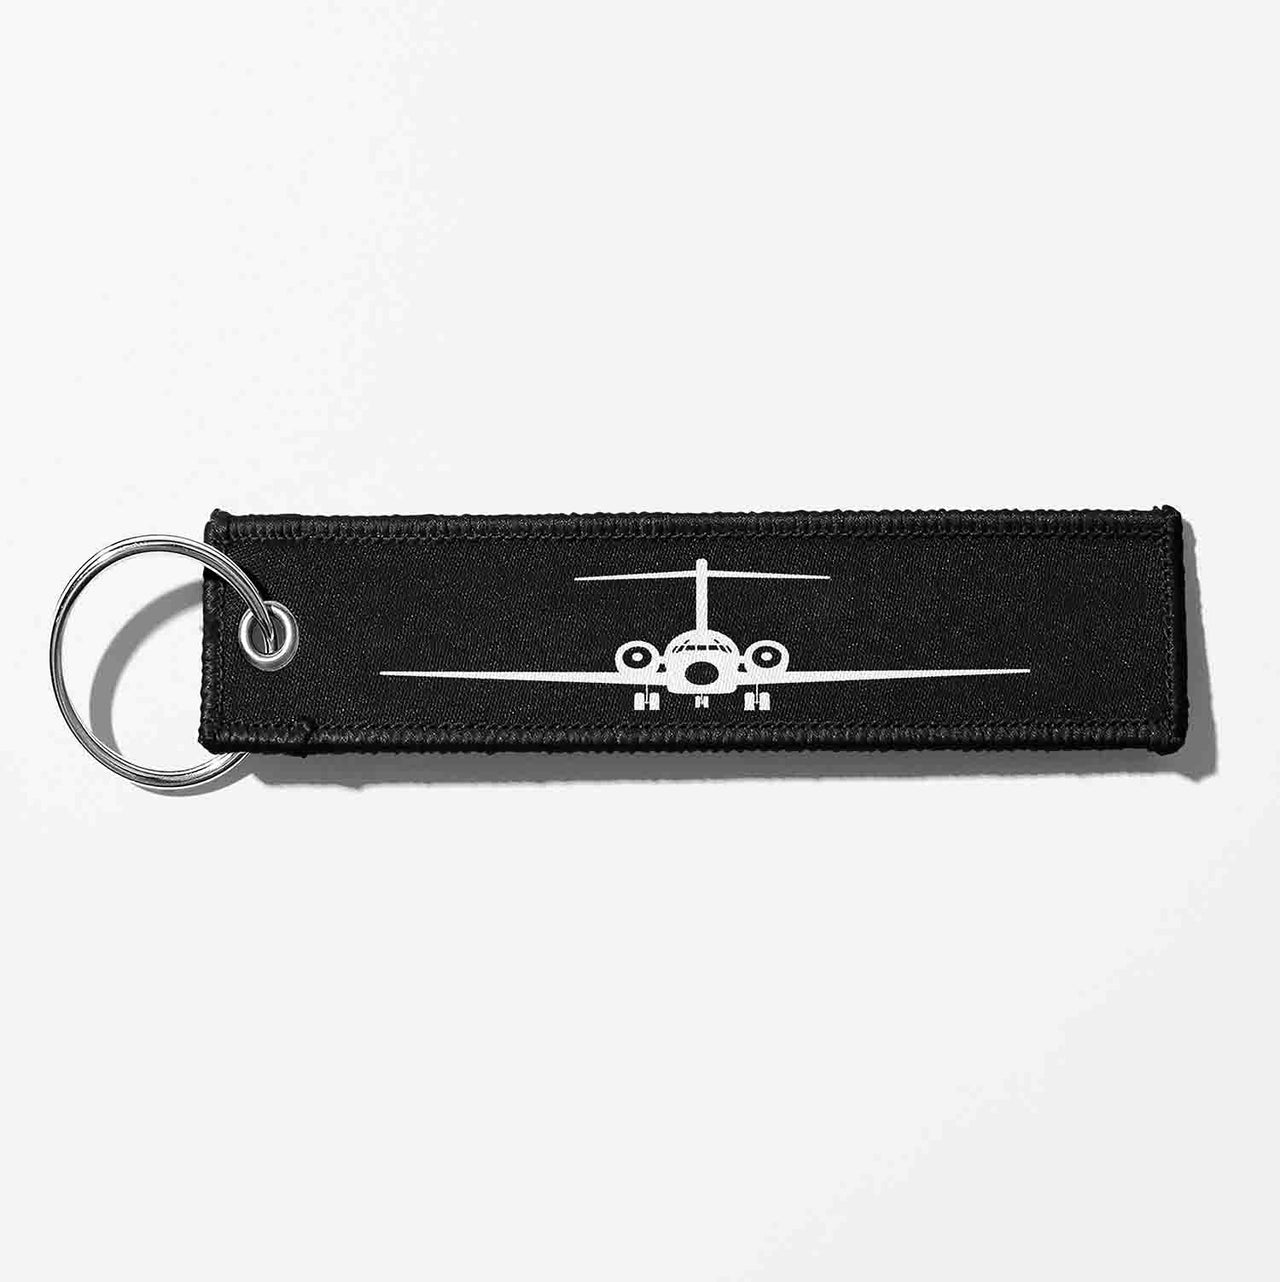 Boeing 717 Silhouette Designed Key Chains